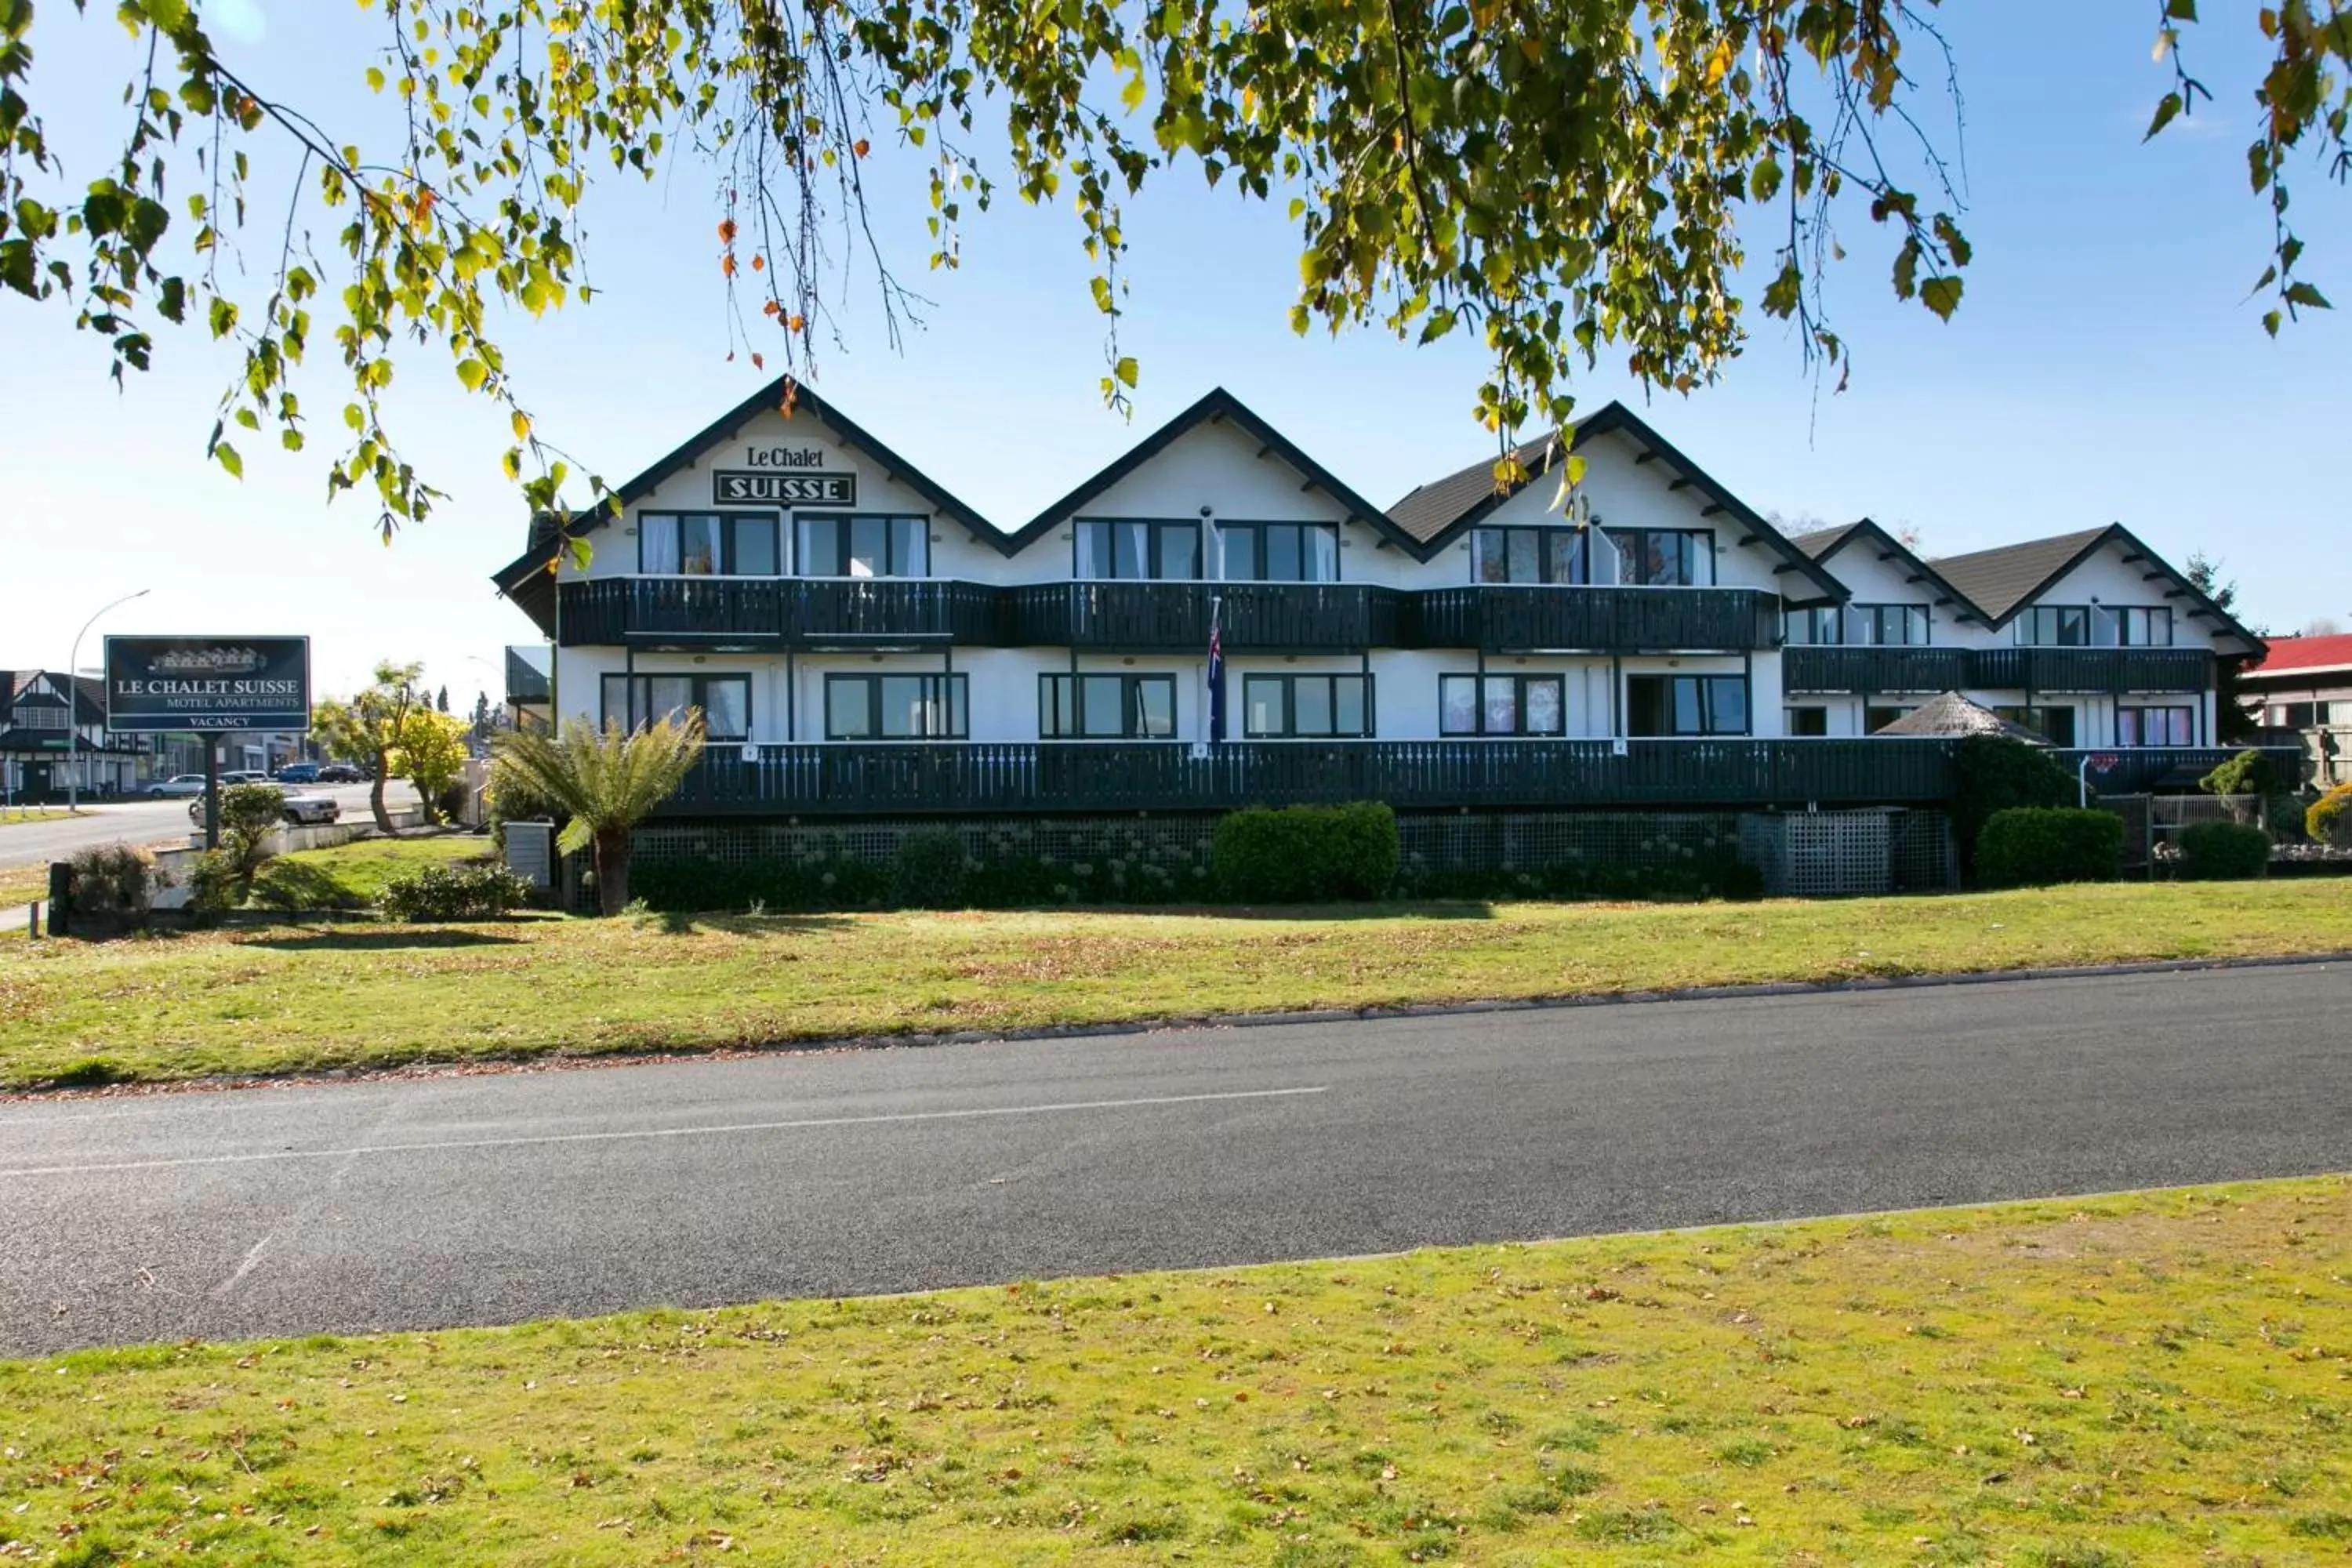 Facade/entrance, Property Building in Le Chalet Suisse Motel Taupo